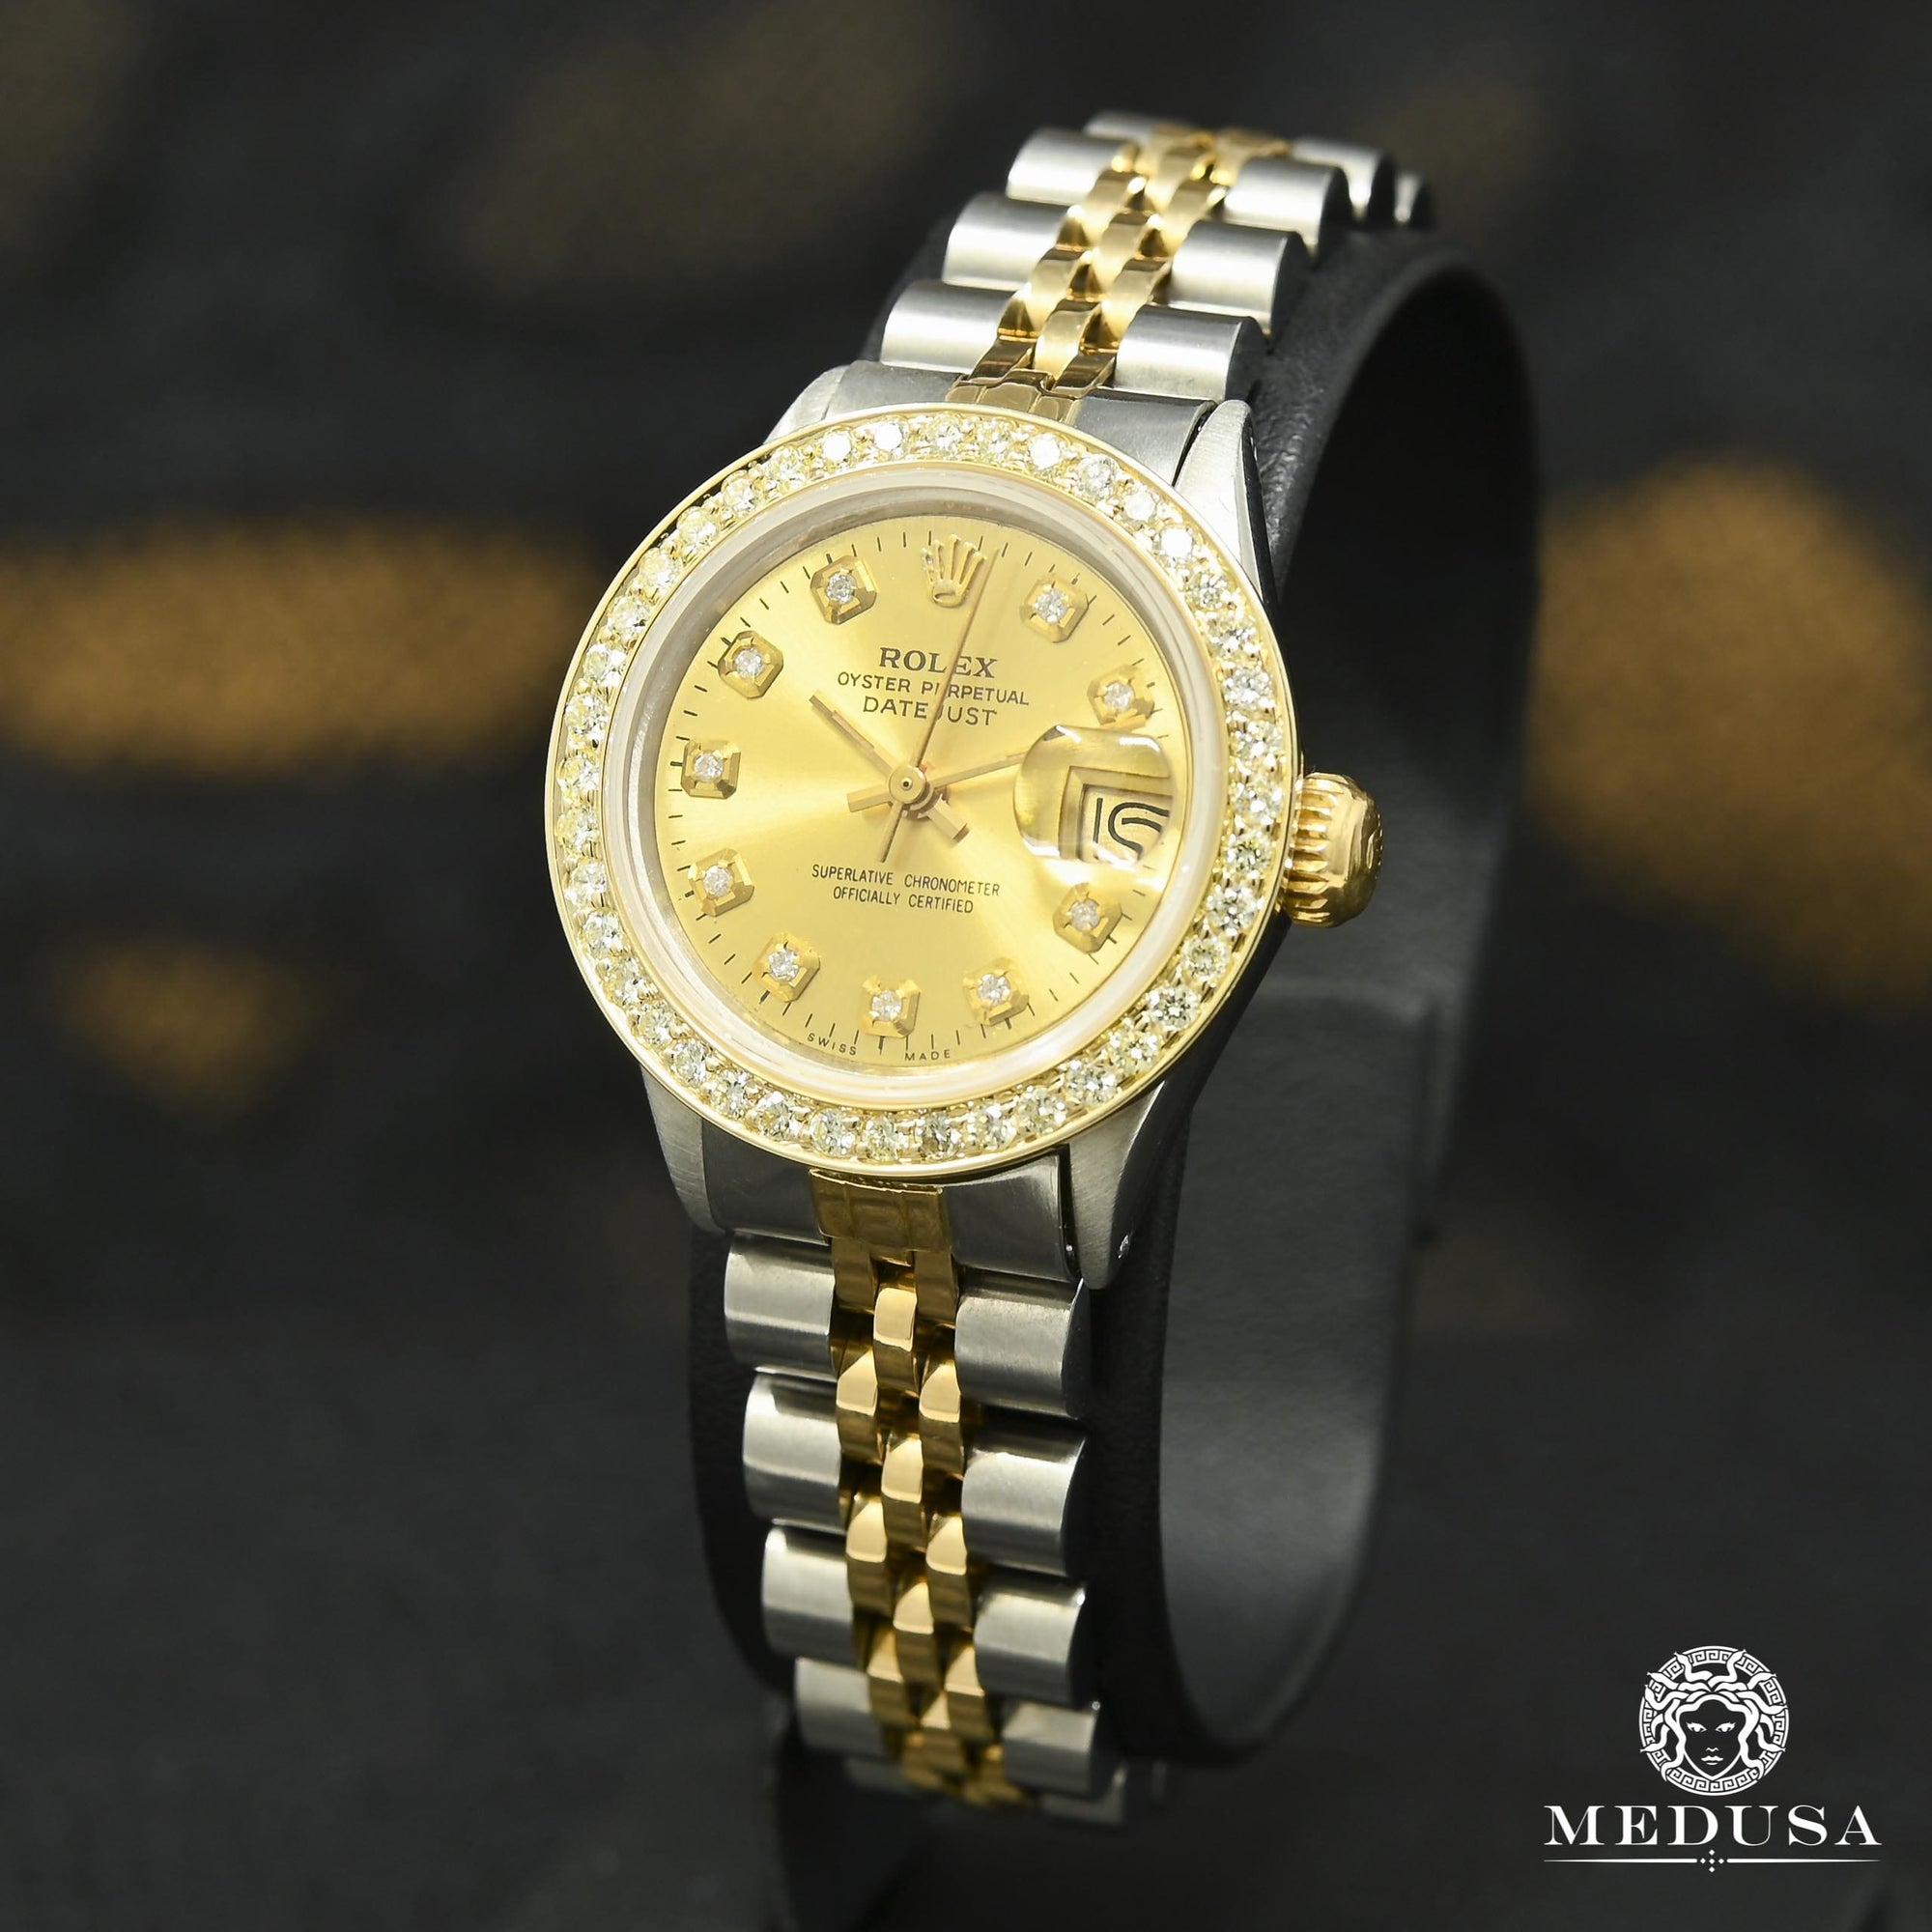 Montre Rolex | Femme Datejust 26mm - Champagne Or 2 Tons